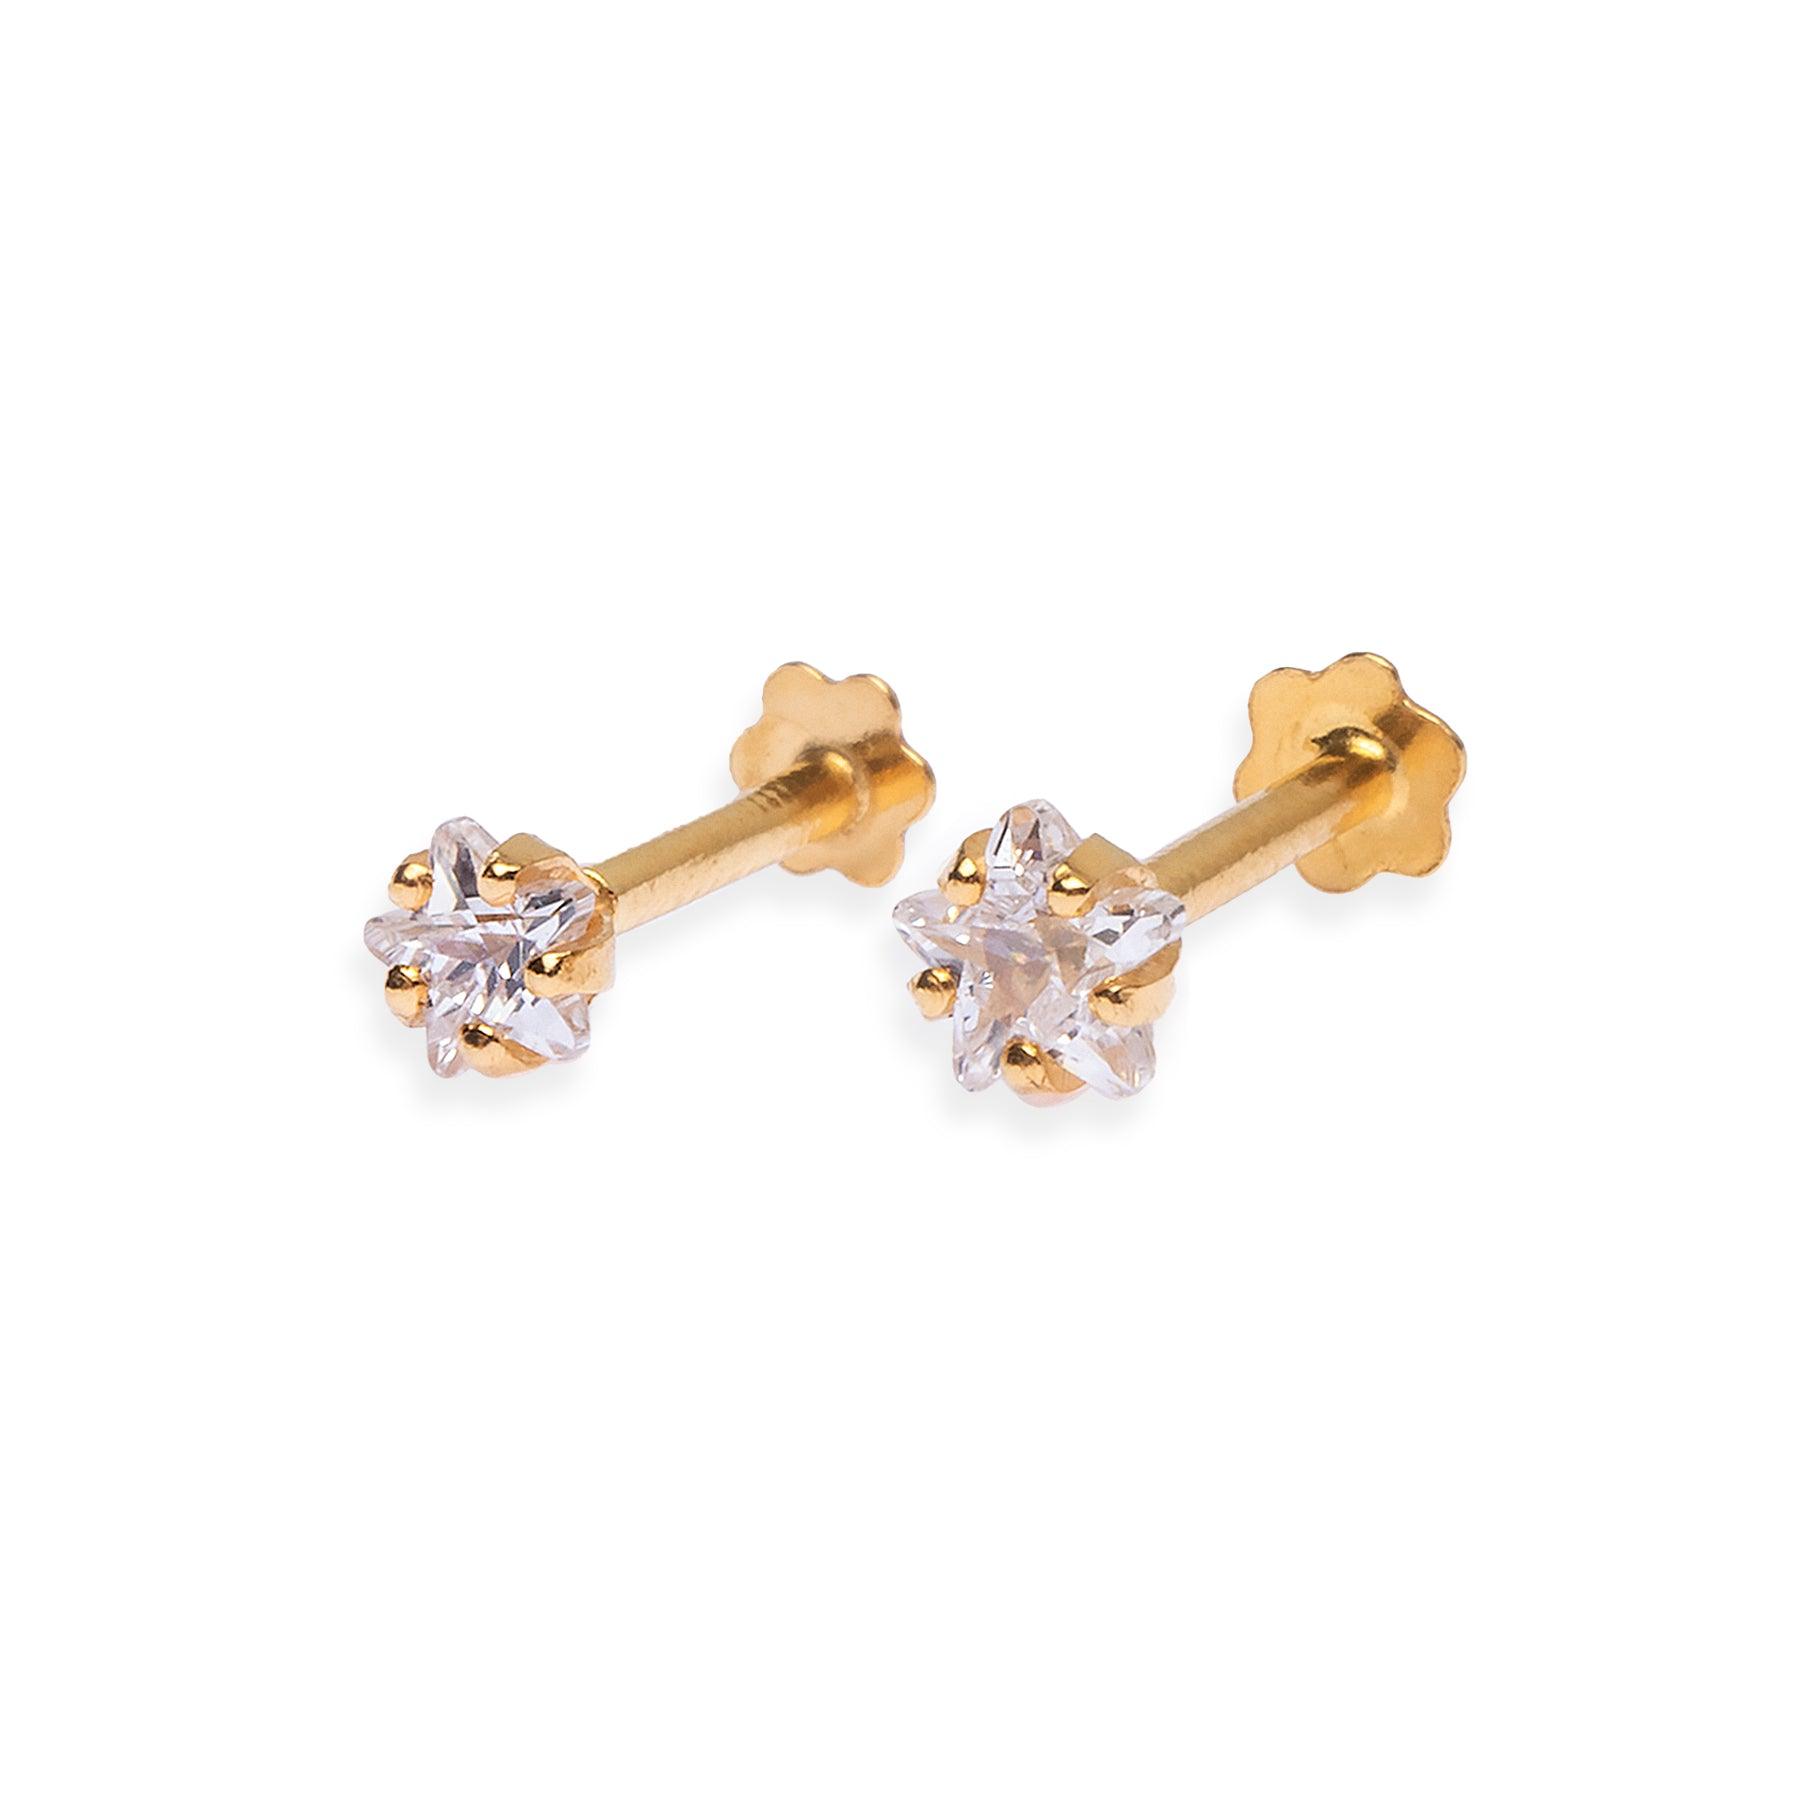 18ct Yellow Gold Screw Back Nose Stud set with a Star Shaped Cubic Zirconia (3mm - 3.5mm) NIP-4-620